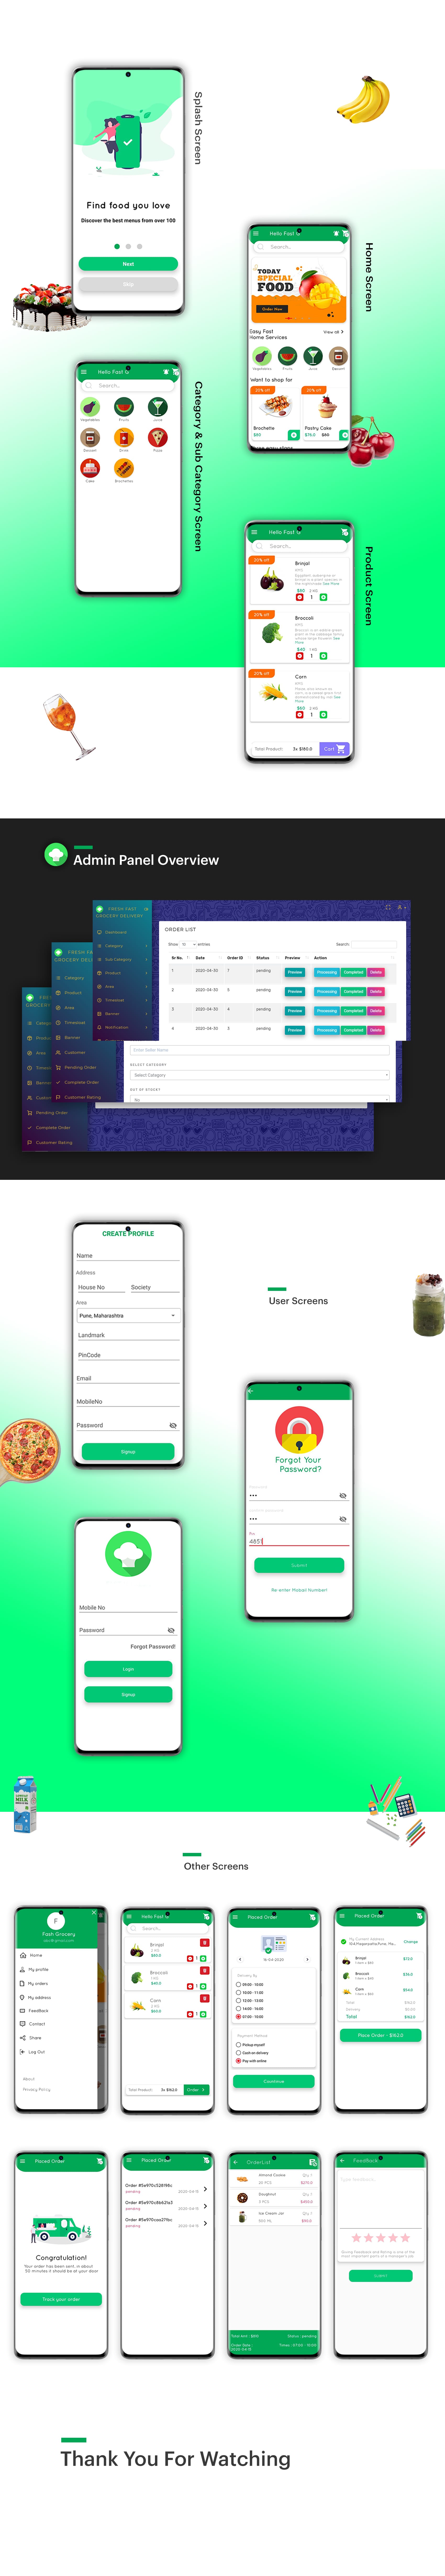 Fresh Fast Grocery Delivery Android App with Interactive Admin Panel v1.2 - 2